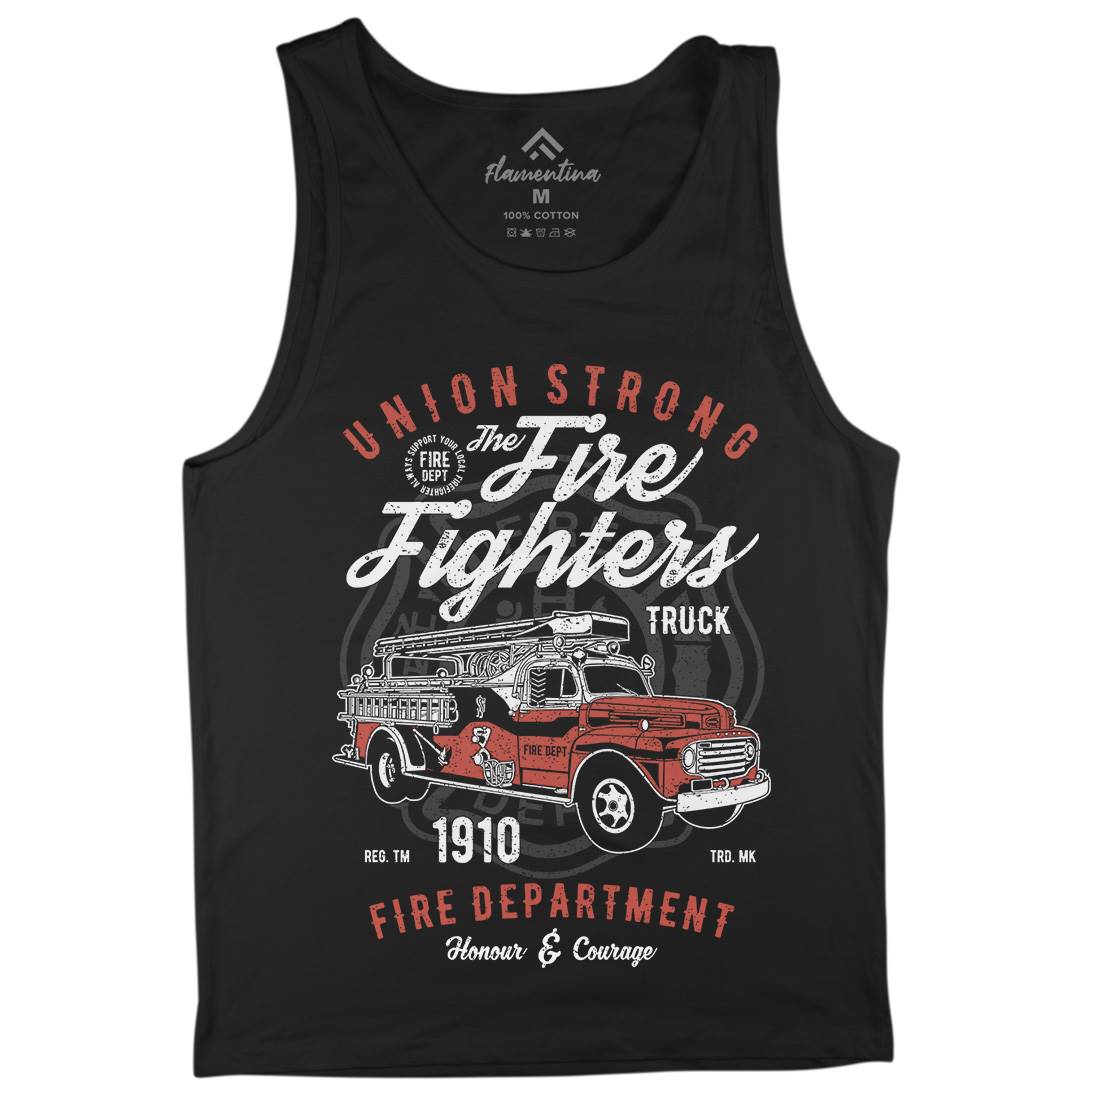 Union Strong Mens Tank Top Vest Firefighters A781